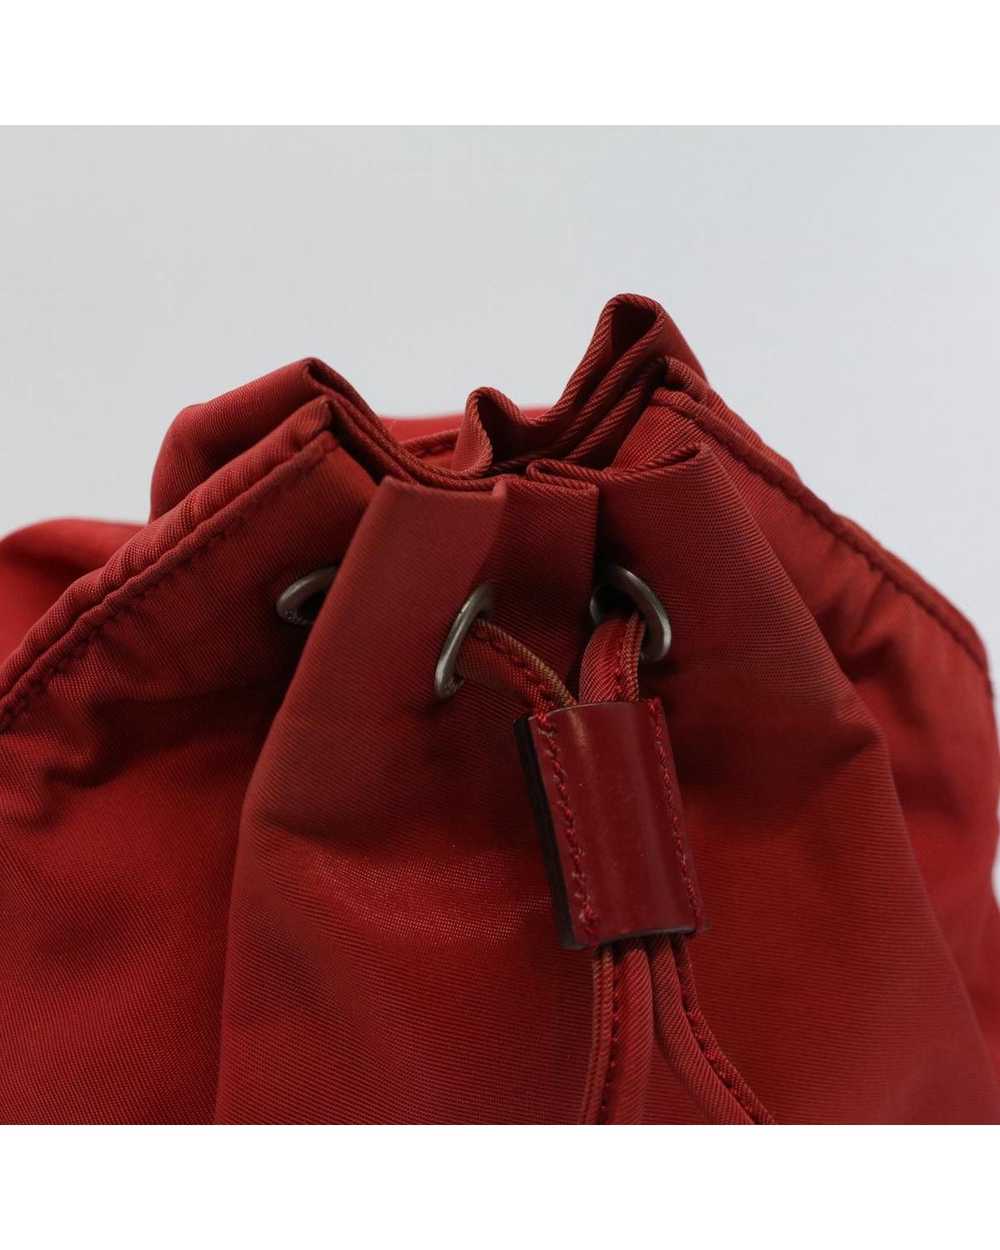 Prada Luxury Red Synthetic Bag - AB Condition - image 6